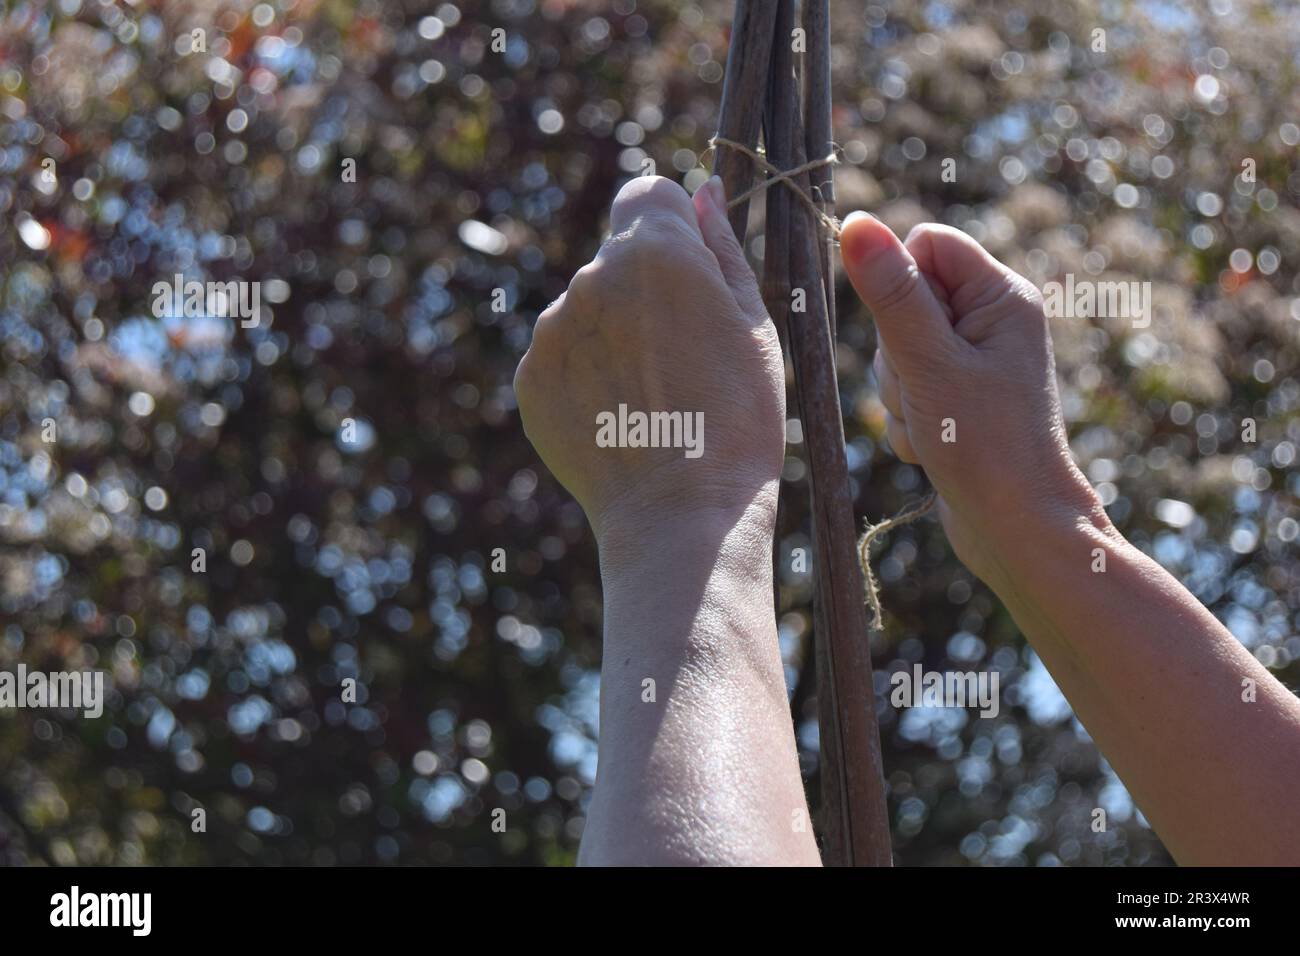 A white woman ties brown string around bamboo stakes to create a wigwam for sweet peas to climb in a garden in the north of England. Stock Photo